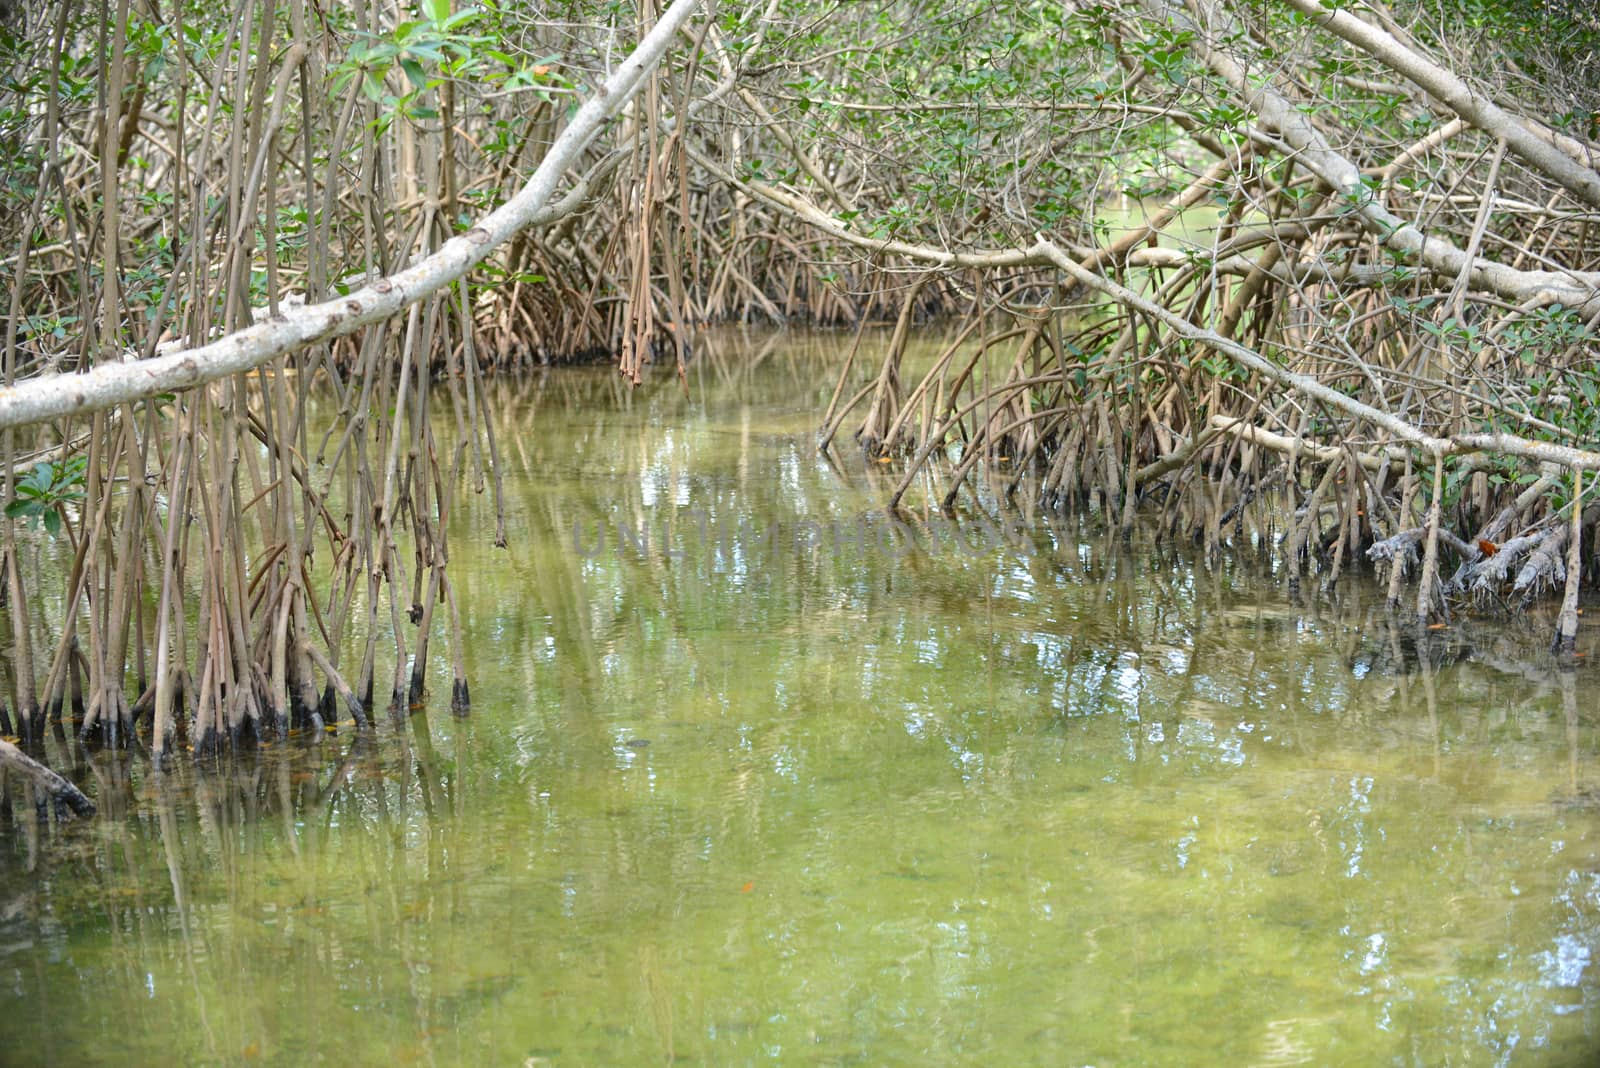 mangrove trees in a tropical location